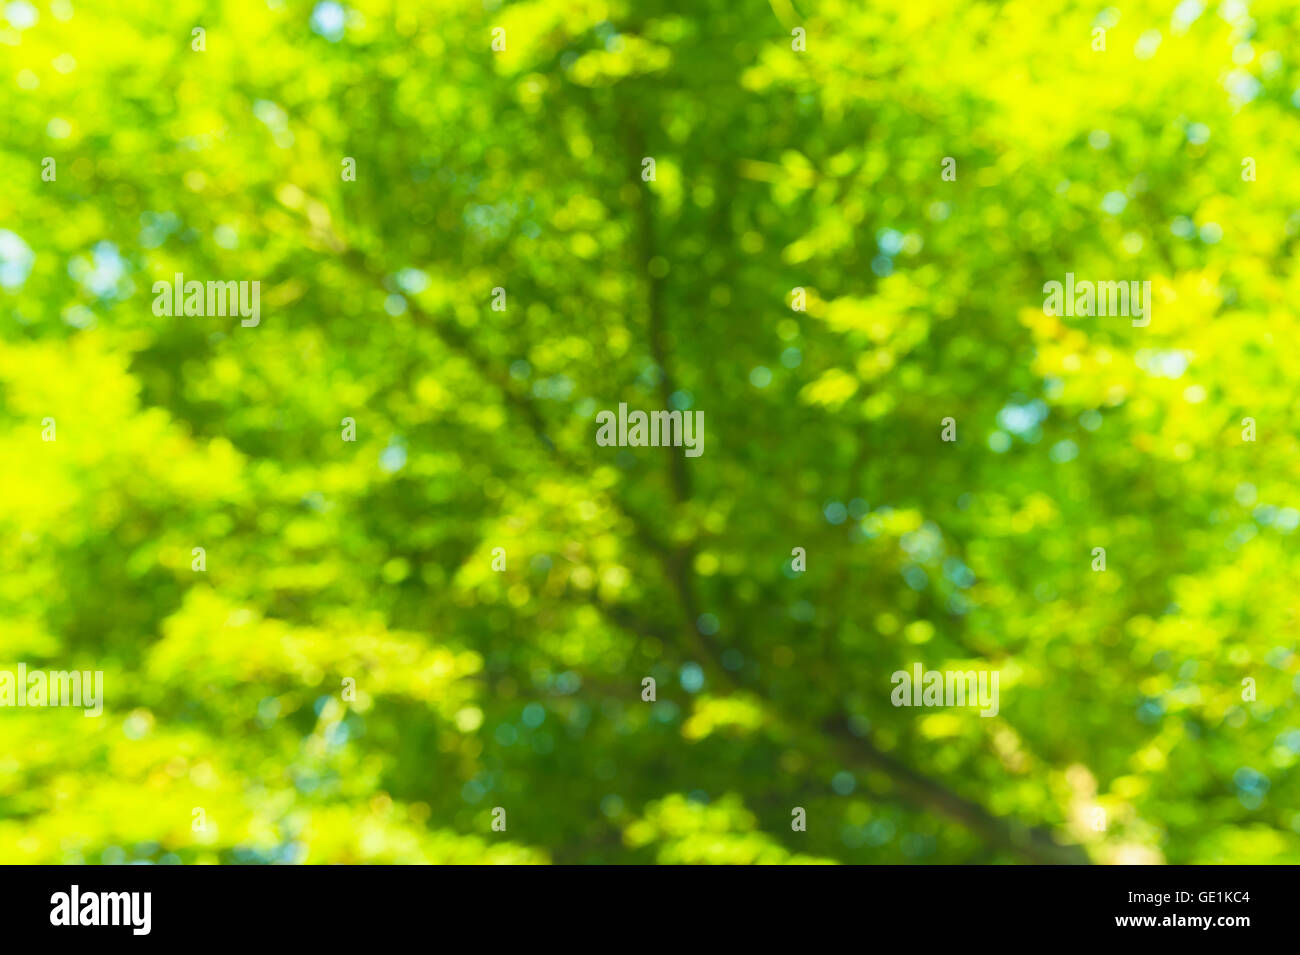 Blurred green maple leaves Stock Photo